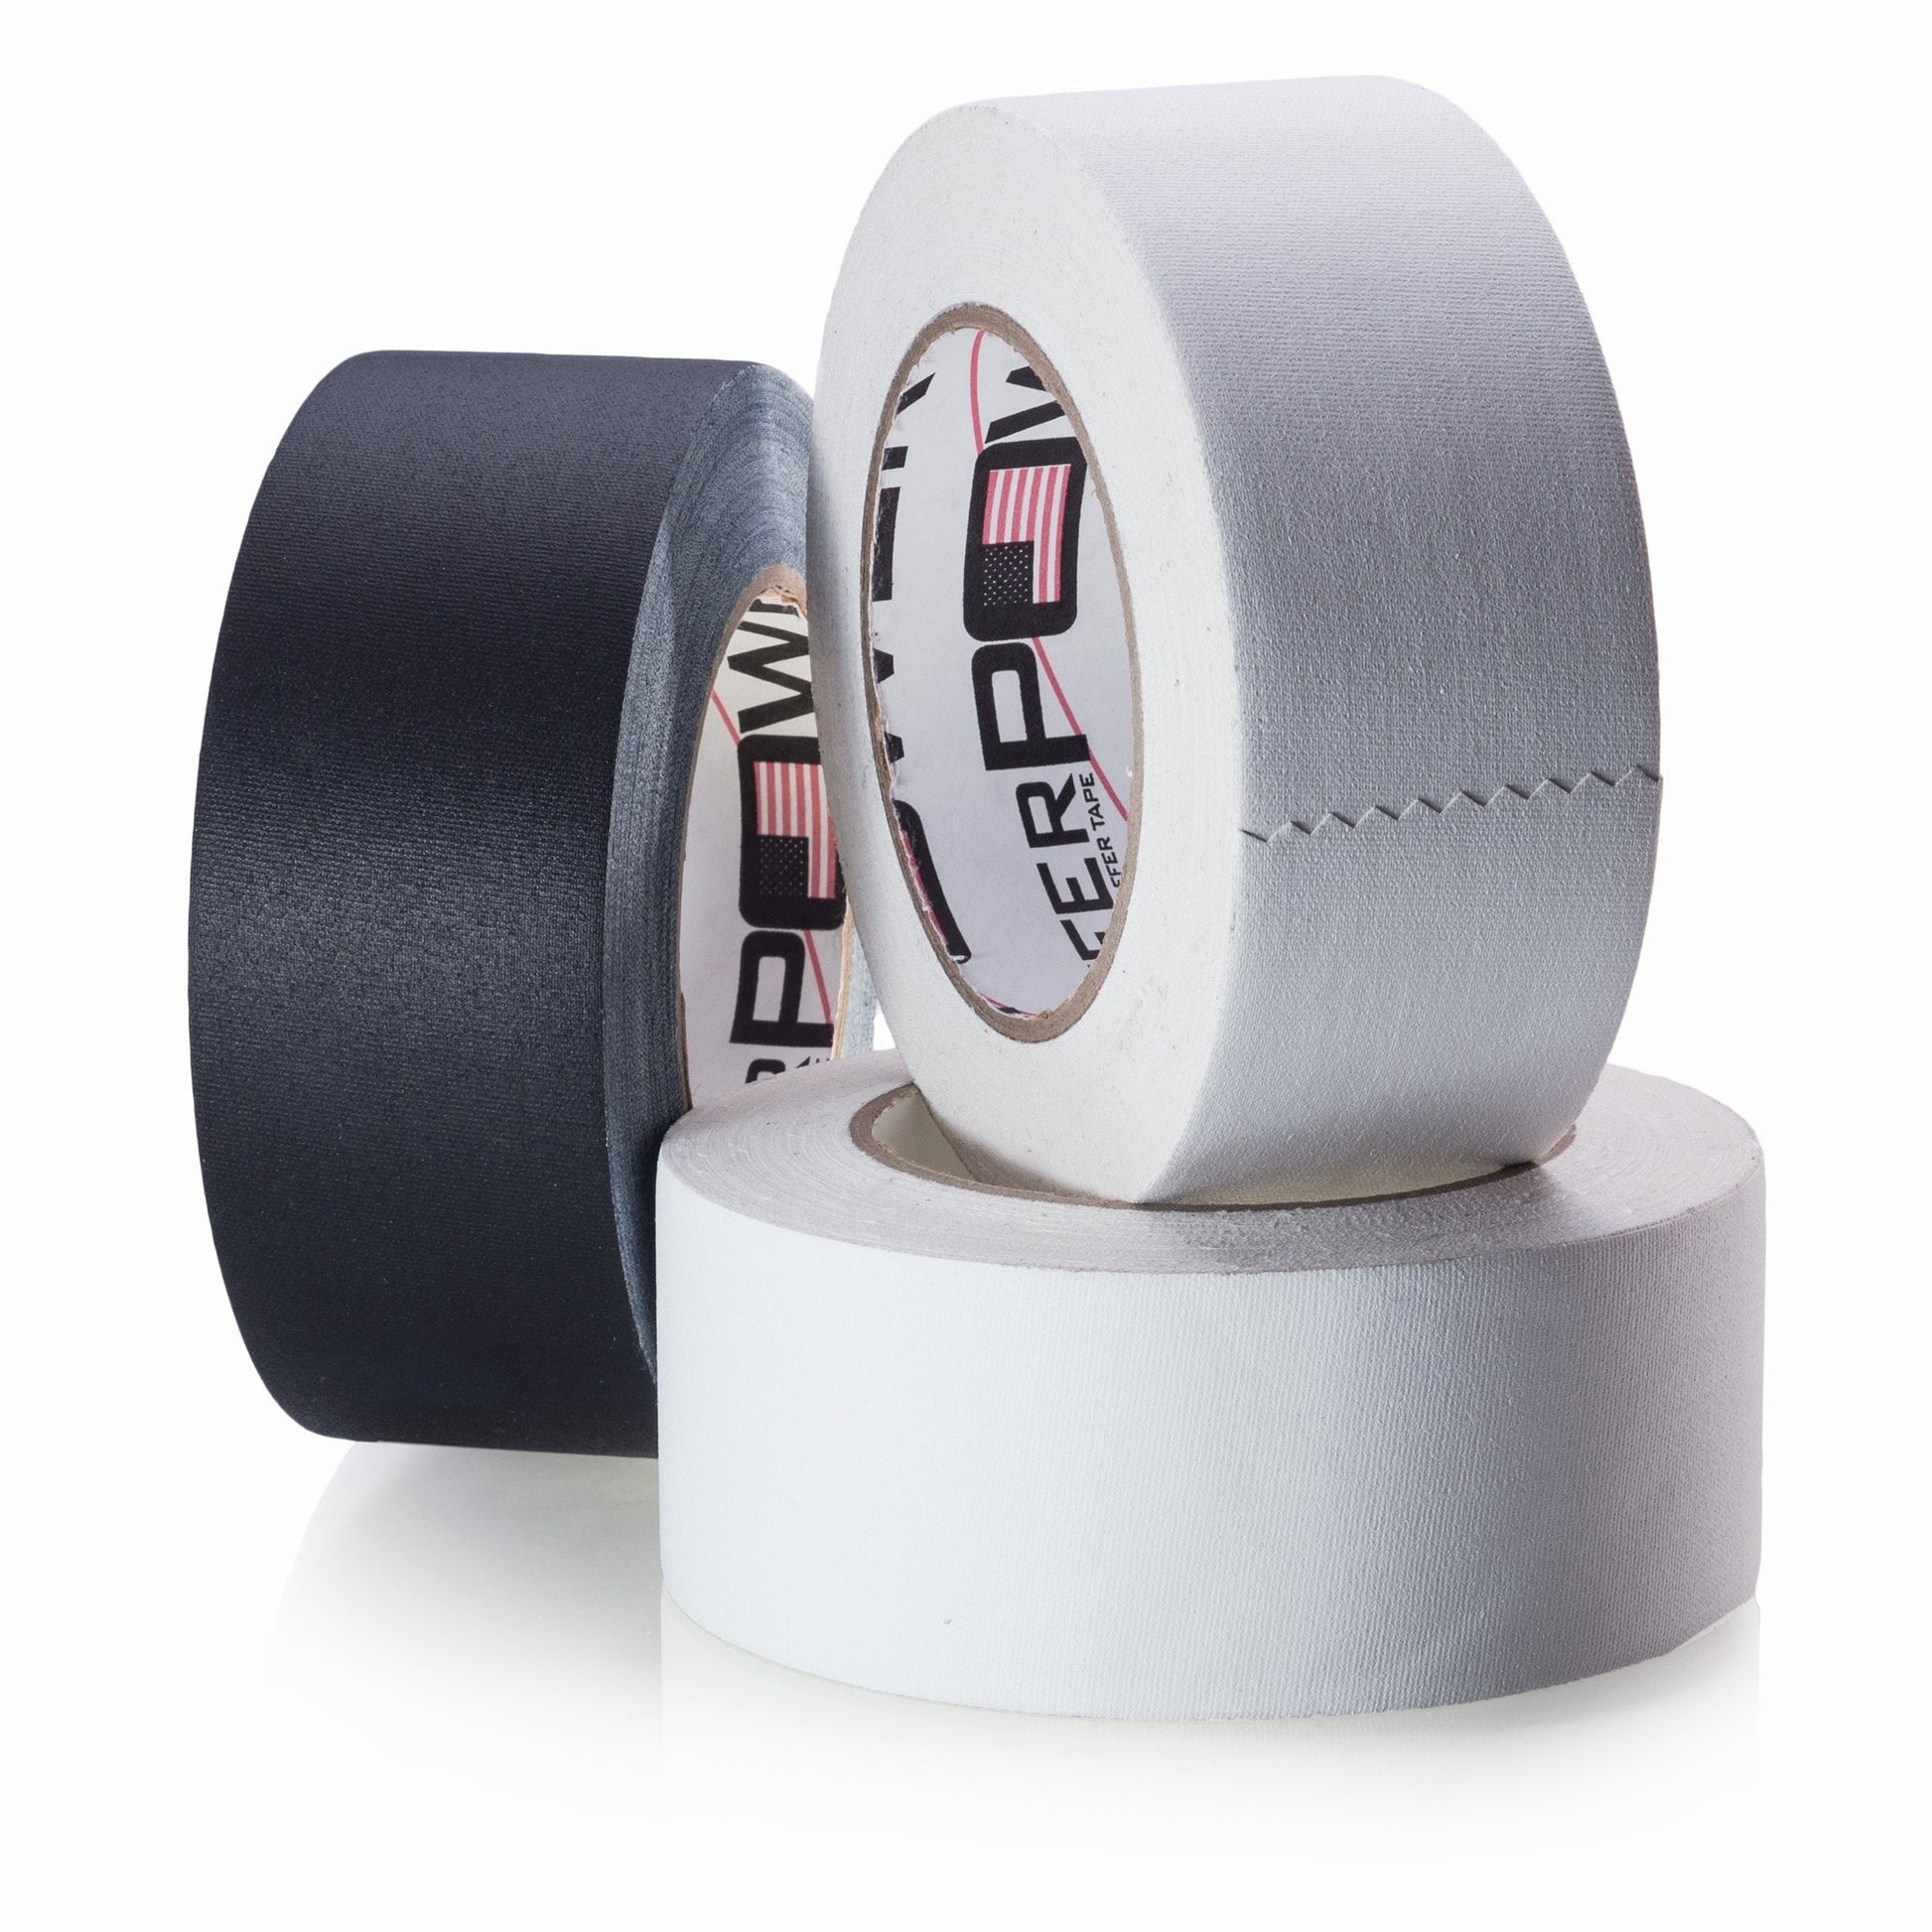 ProX Commercial-Grade Gaffer Tape (3 x 60 yd, White)